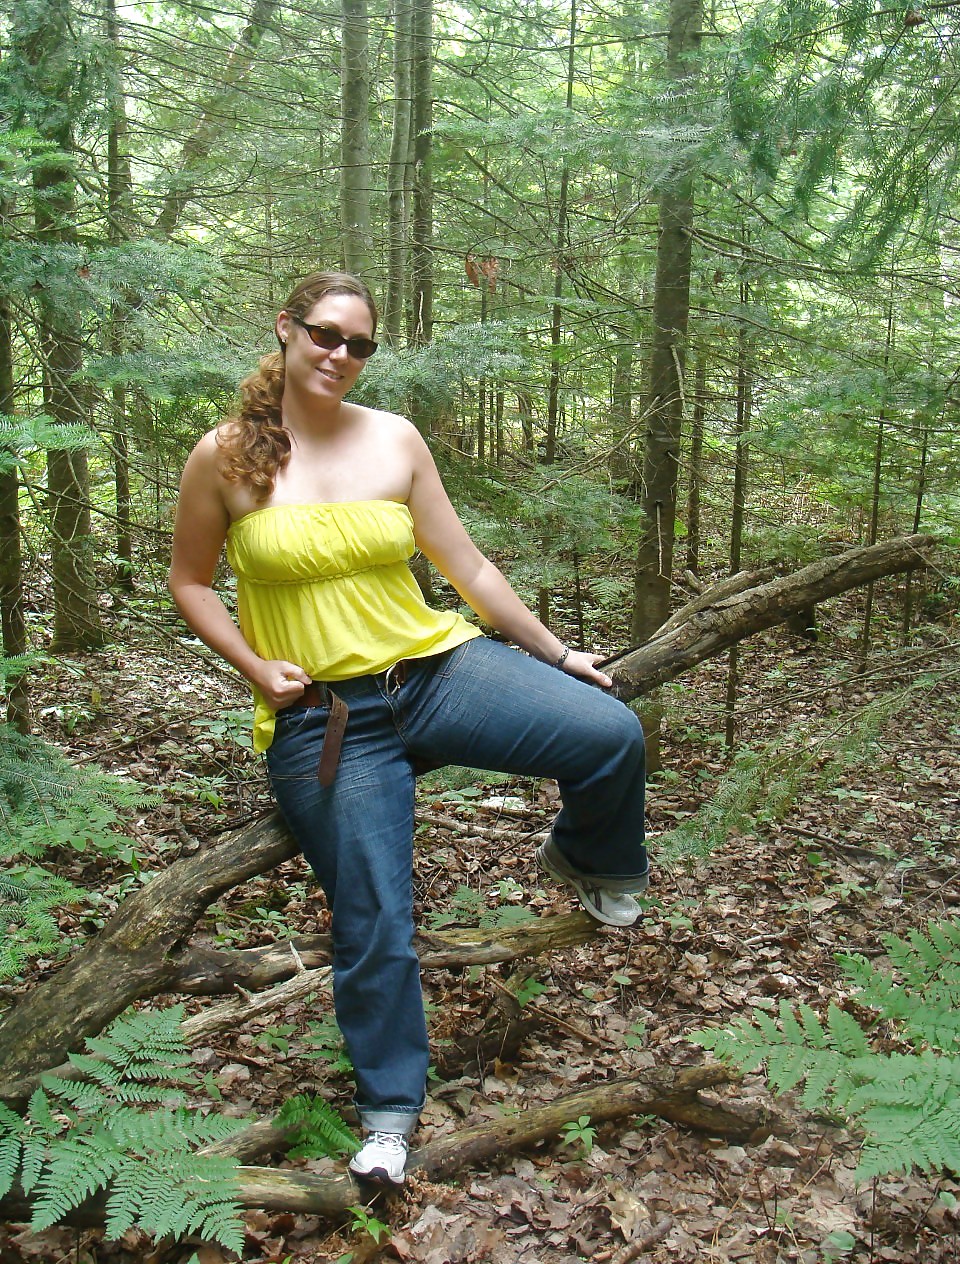 Chubby Milf in the forest pict gal